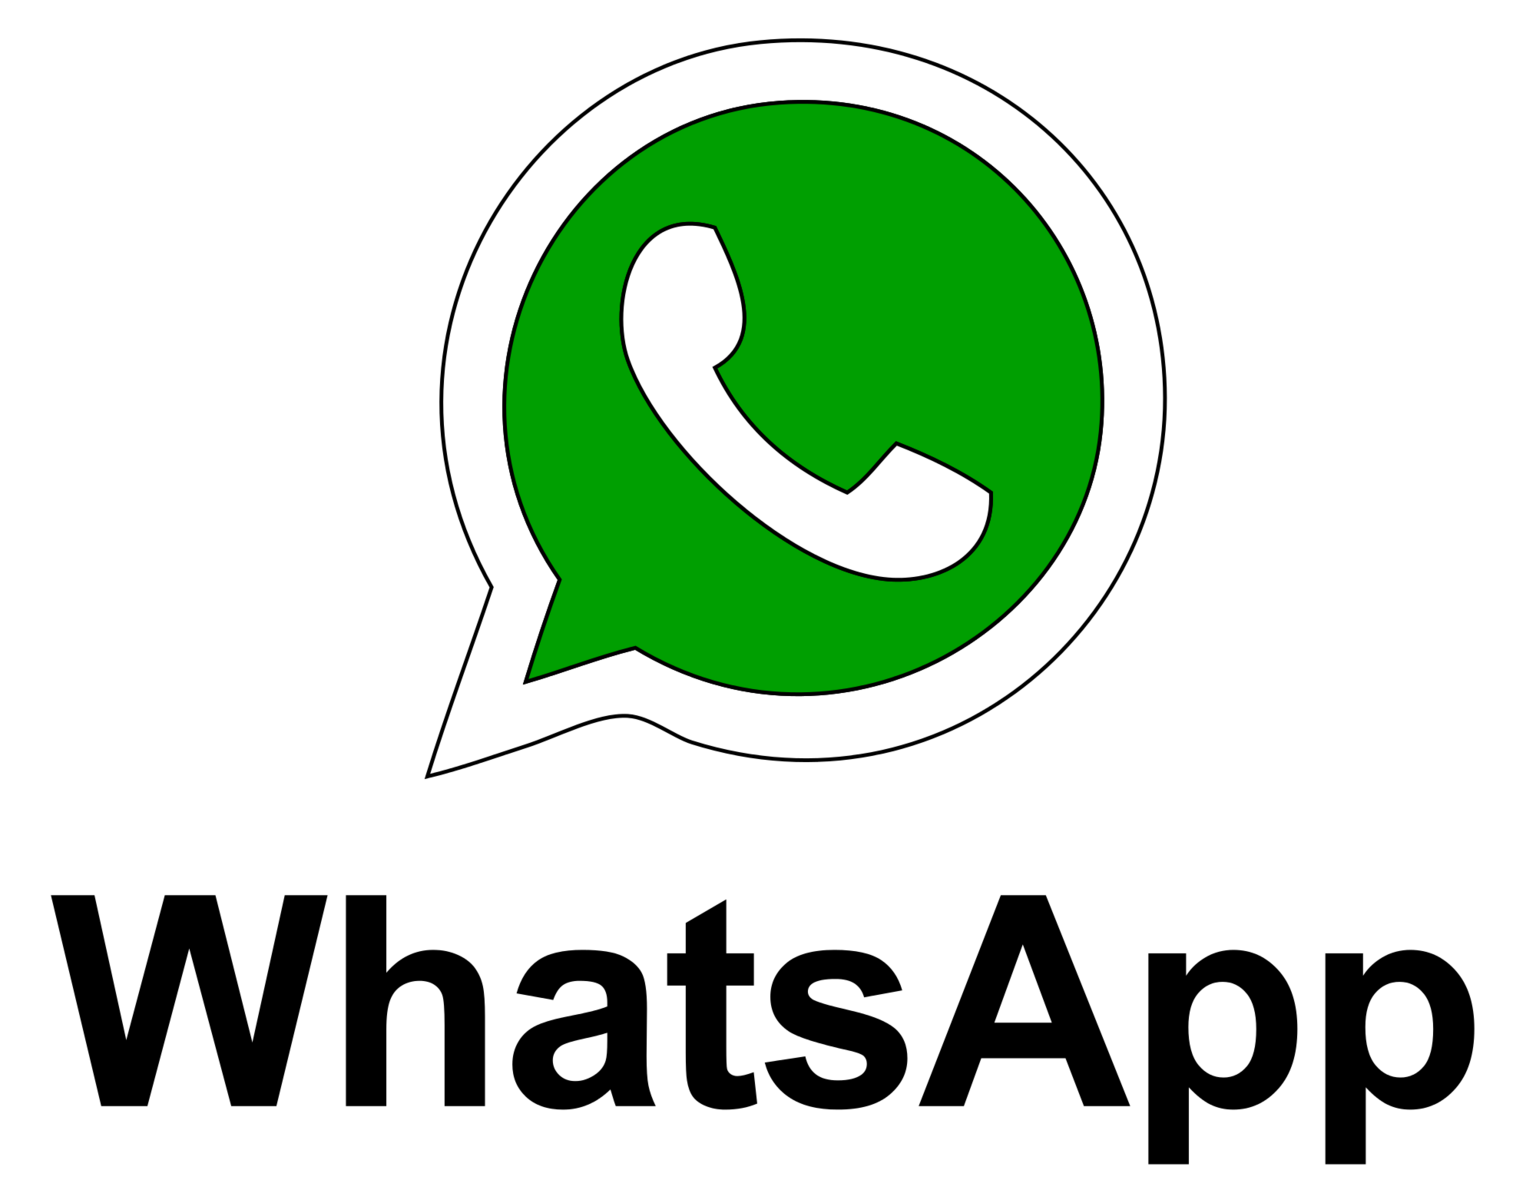 WhatsApp likely to allow sharing of all file types